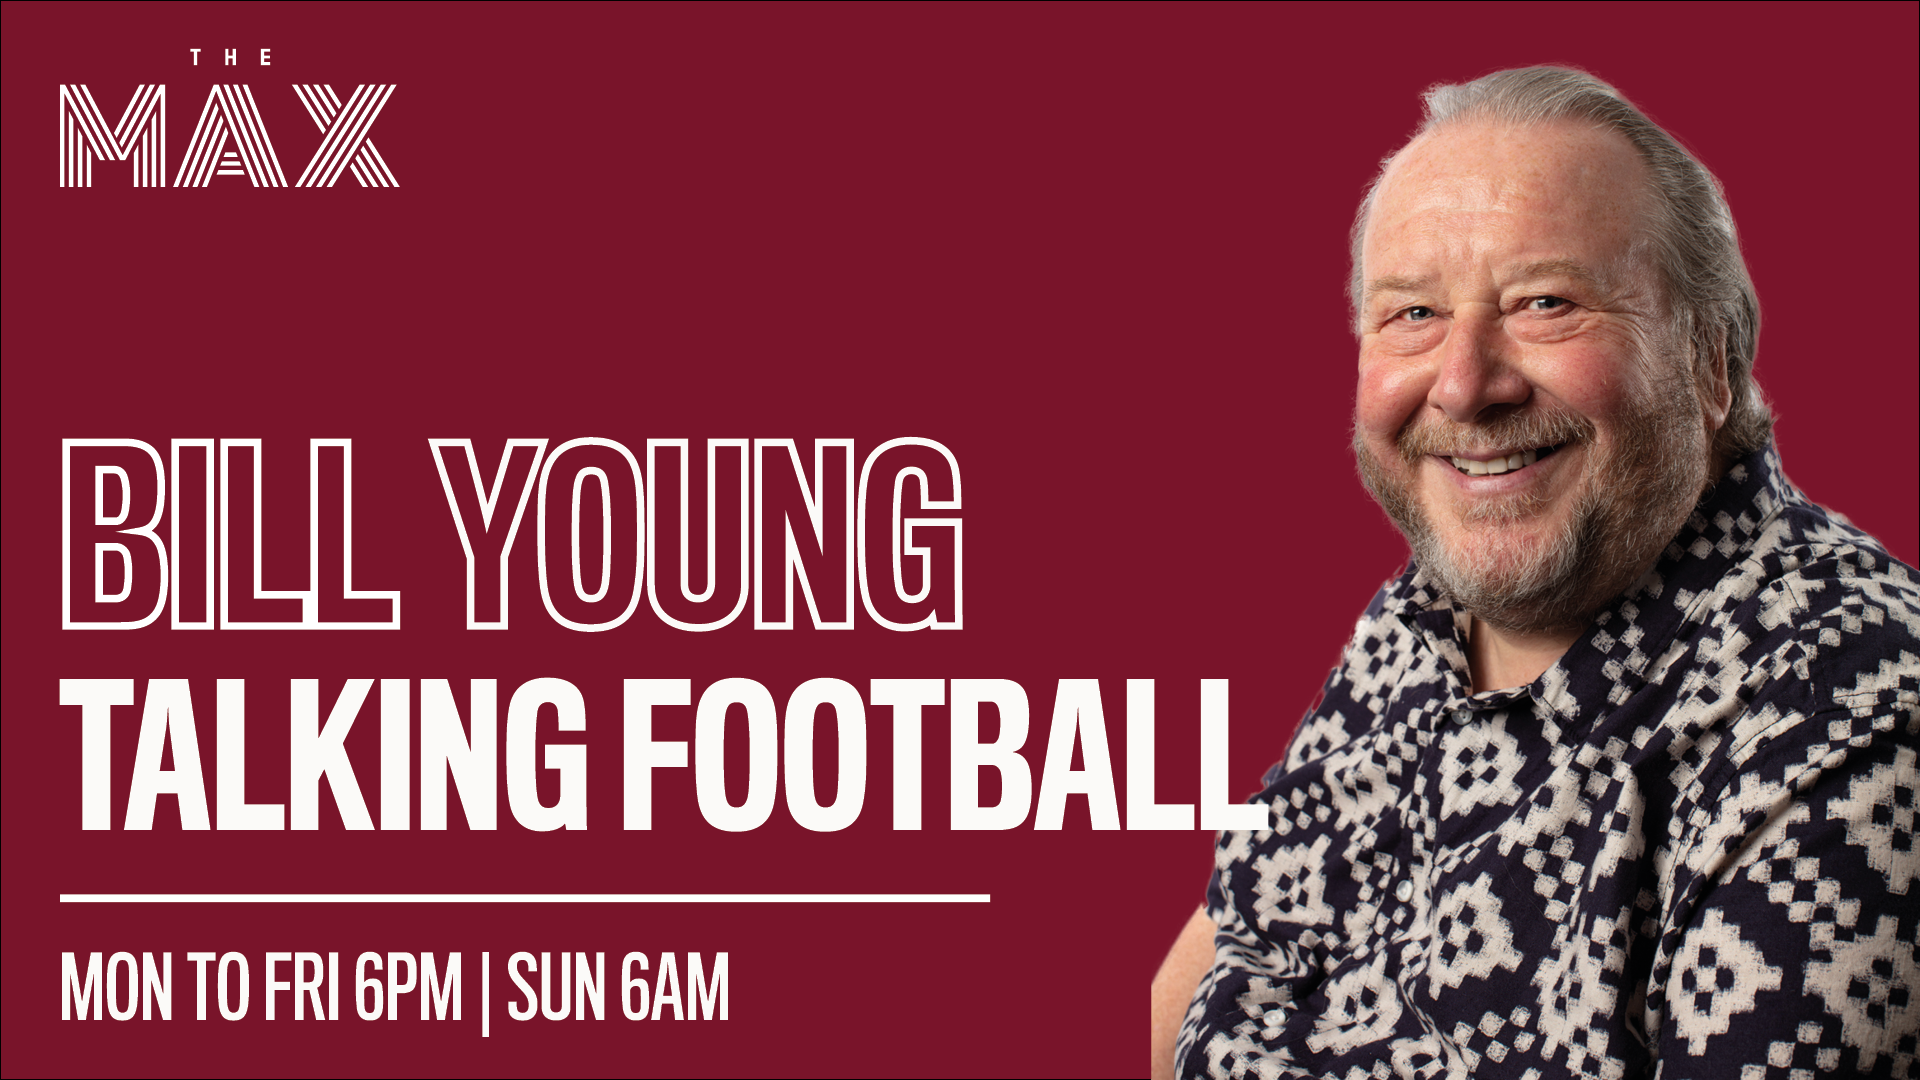 Talking Football with Bill Young - Monday 10th May